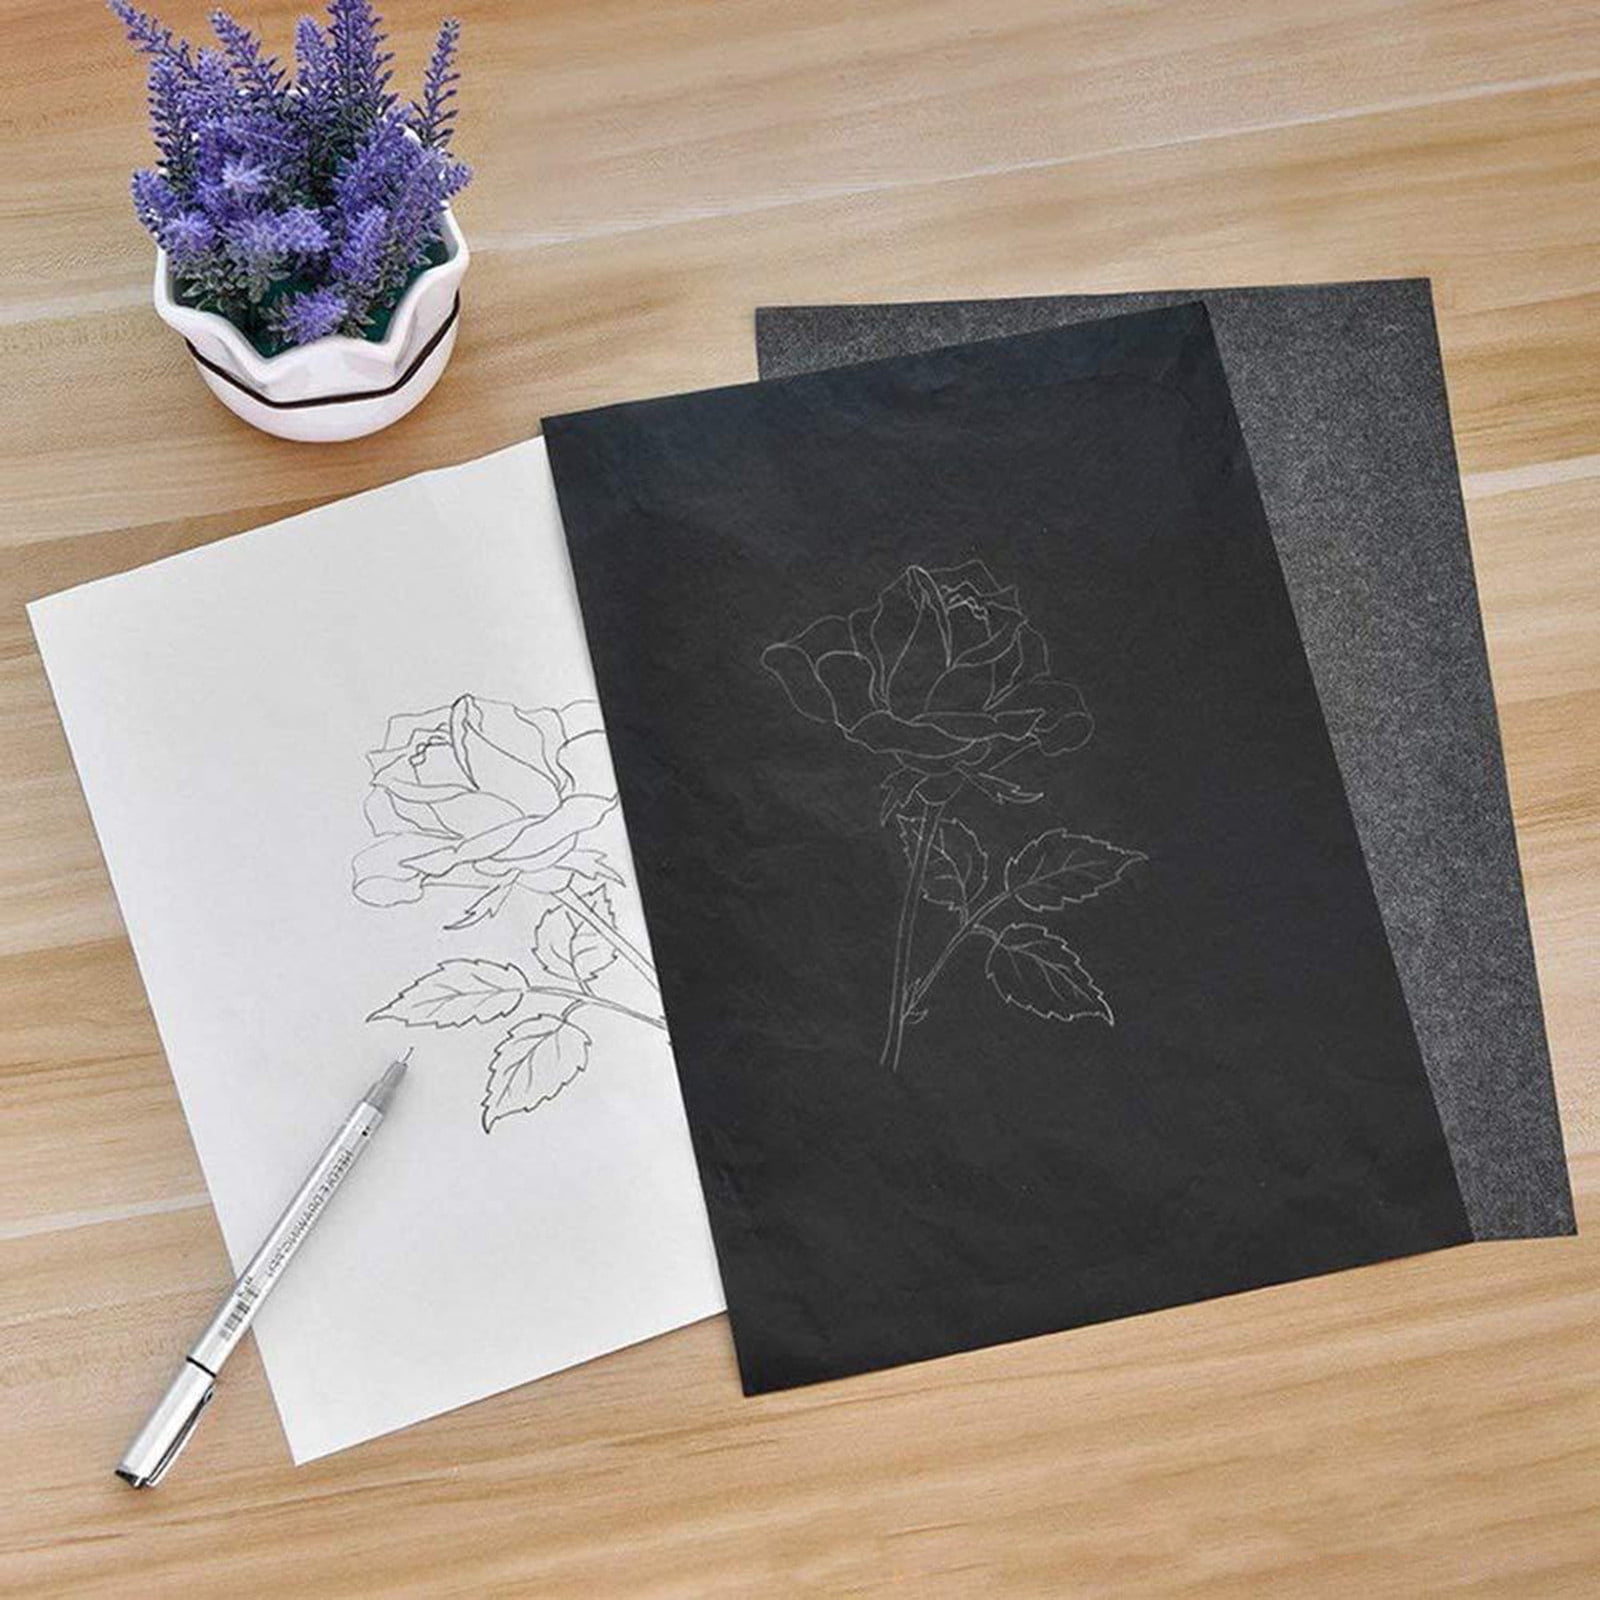 School Supplies Deals！50 Sheets Carbon Paper Black Graphite Paper Transfer  Tracing Paper,Graphite Paper for Tracing Drawing Patterns on Wood Projects